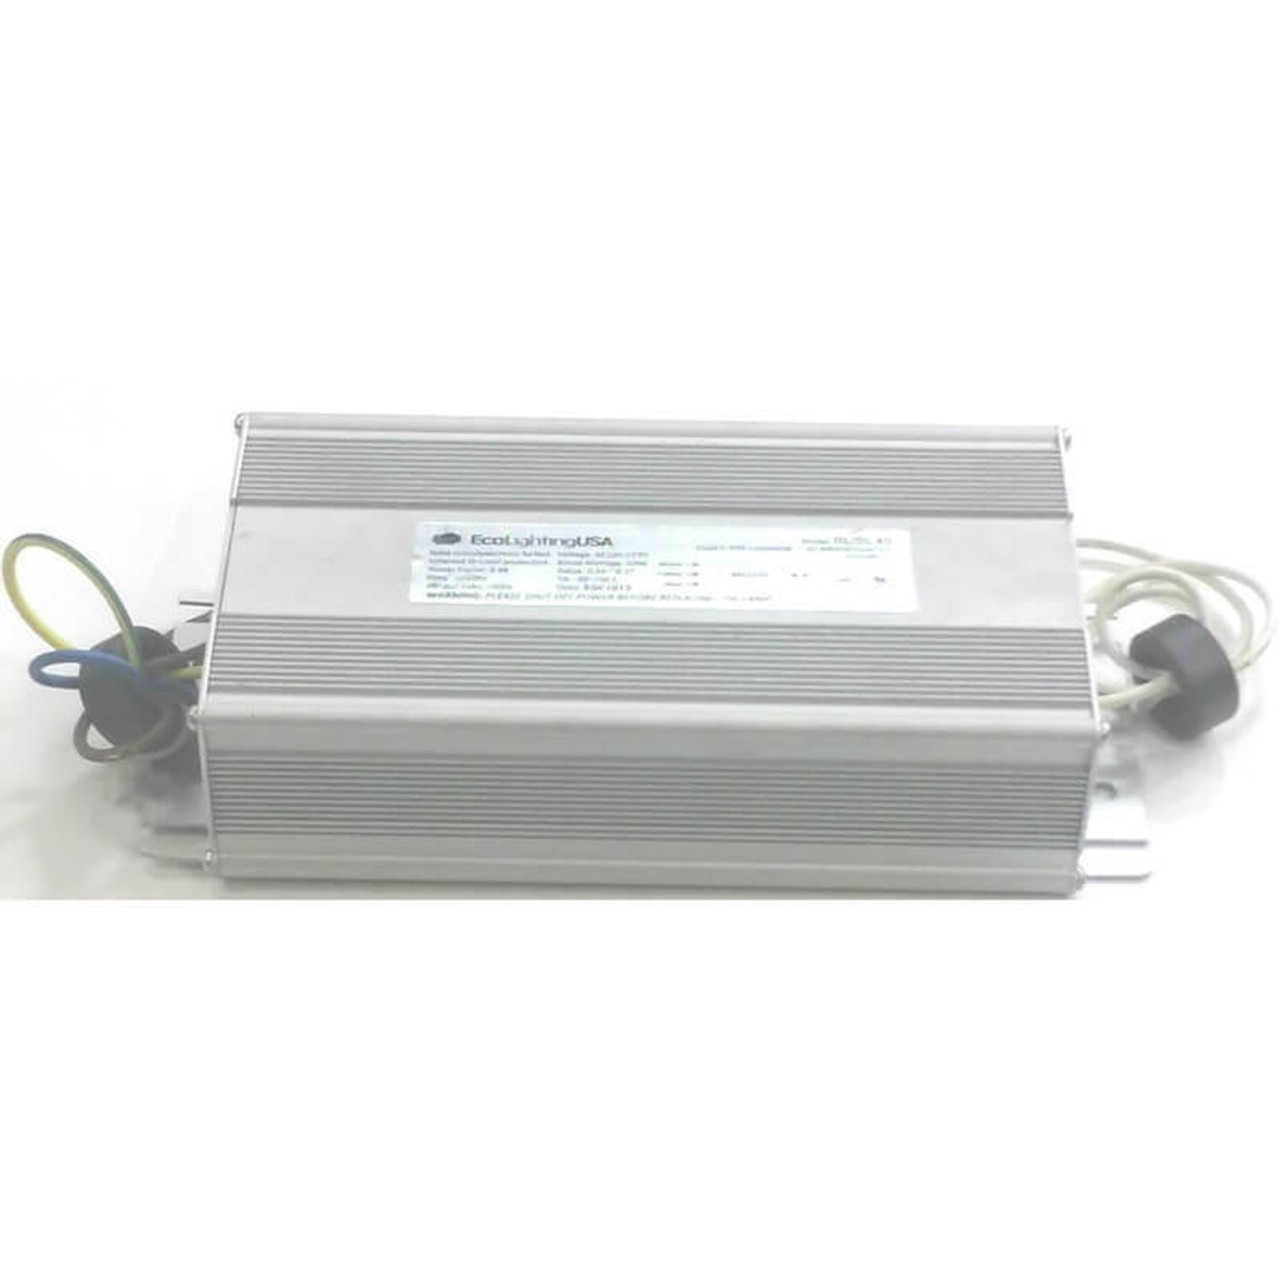 200w Induction Electronic Ballast Power Supply 110-277v Compatible with JK  10601200H01 and JK WJY200DH01-U (Ballast Only) ILBALJK200